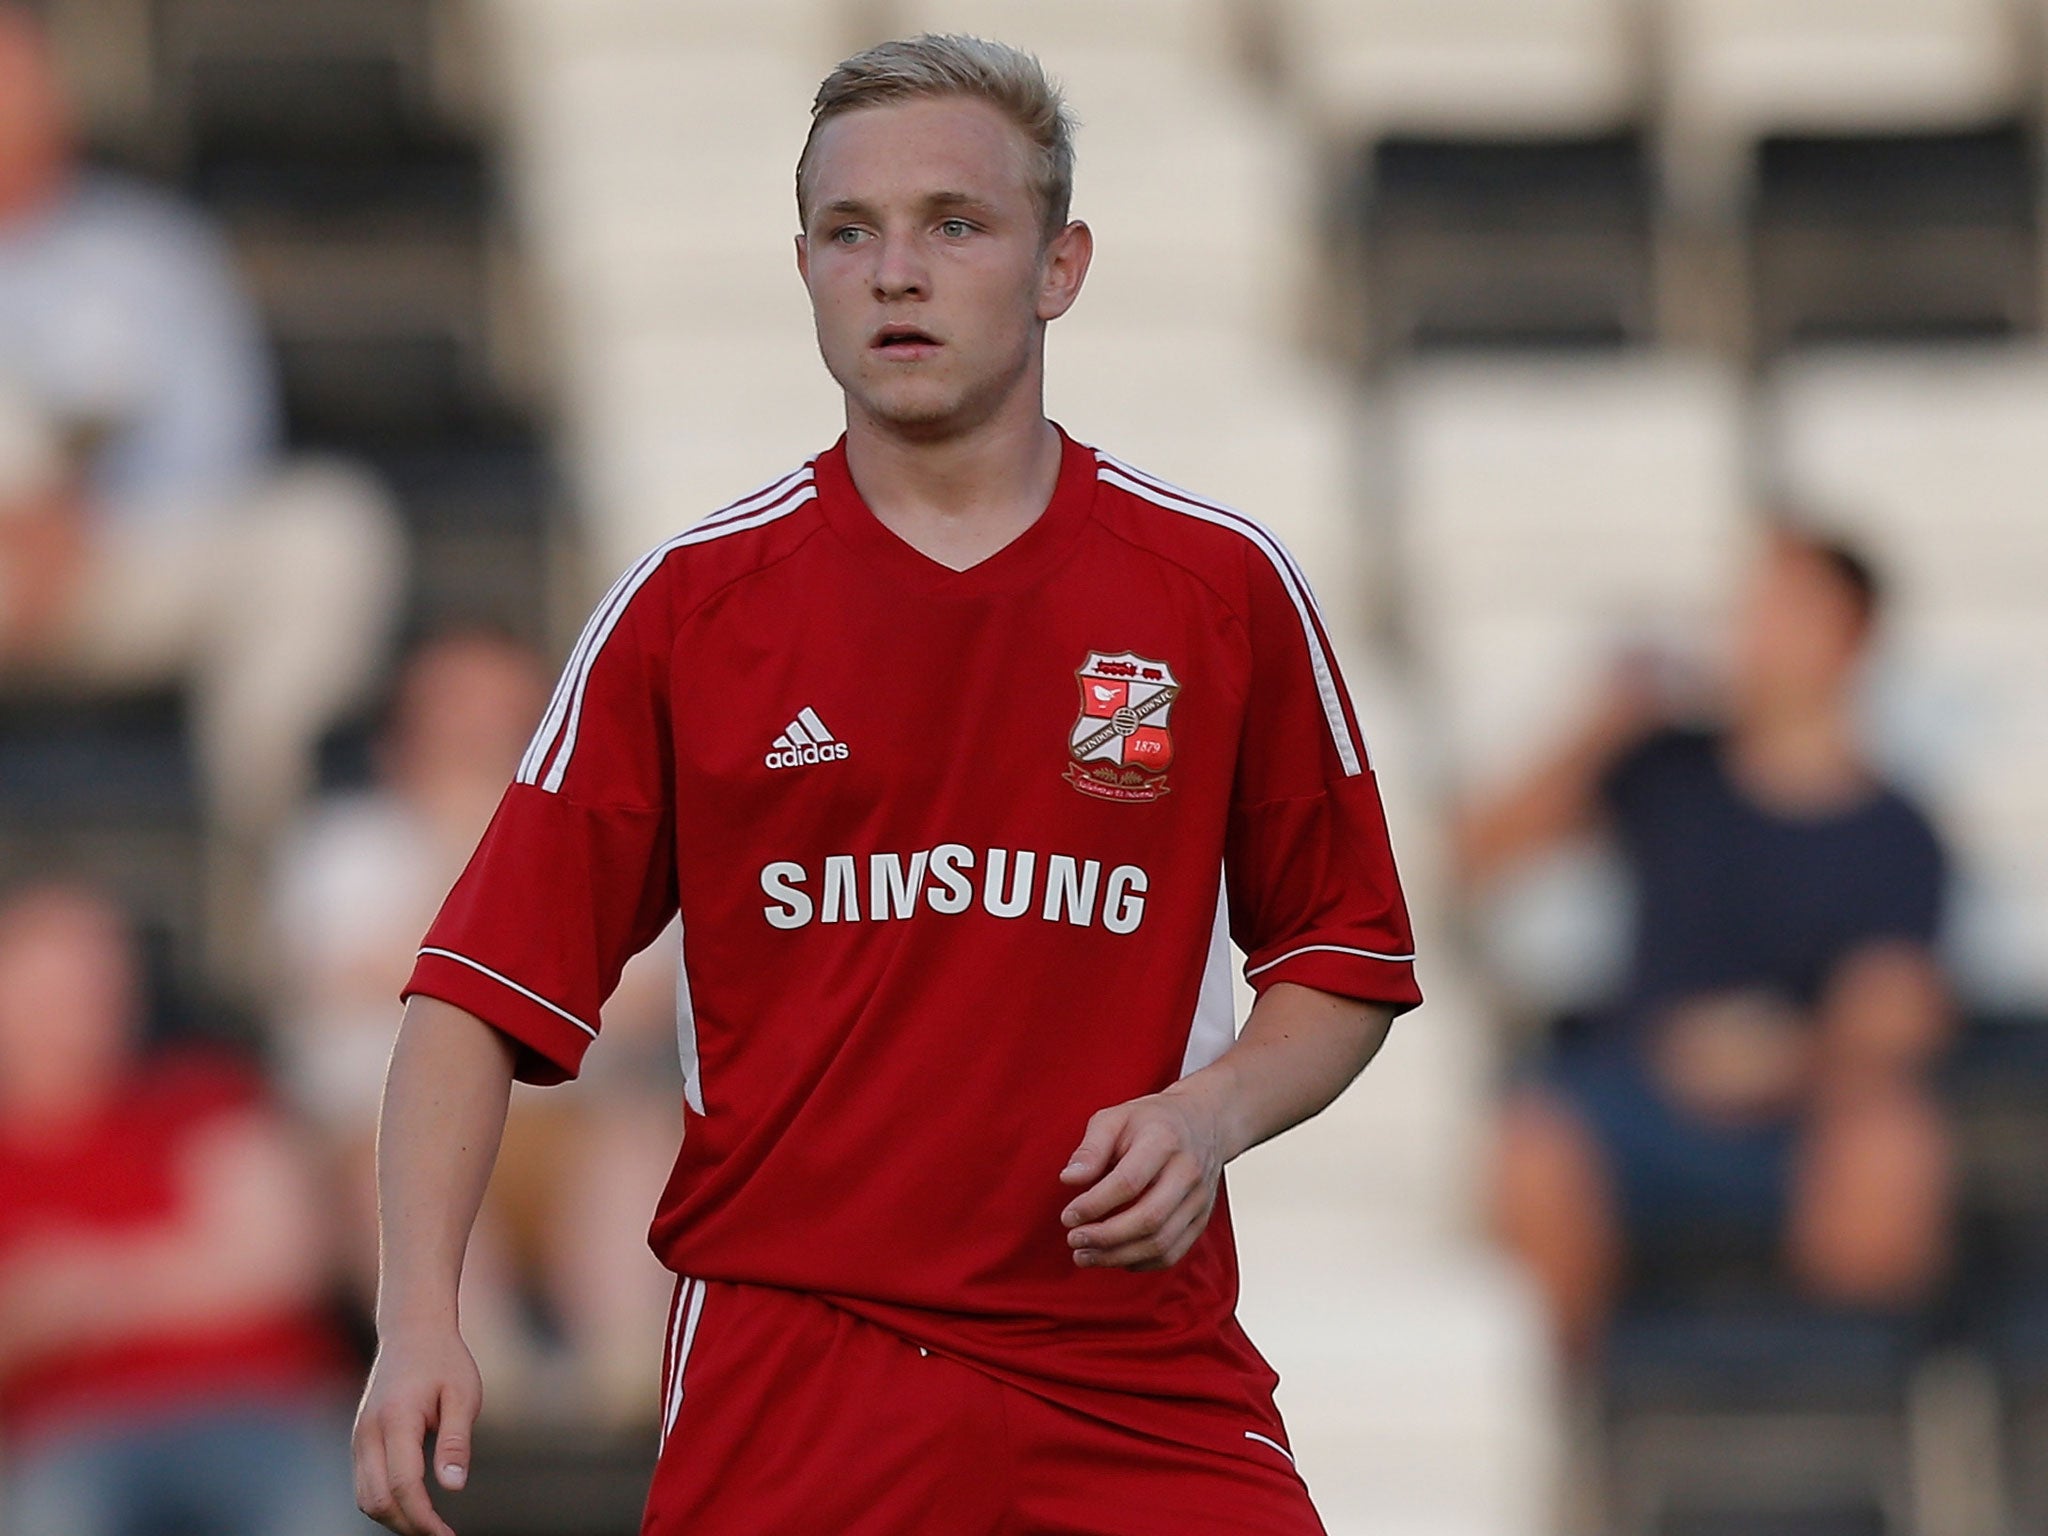 Going west: Alex Pritchard is one of three Tottenham prospects on loan at Swindon, who have also permanently signed three former Spurs players